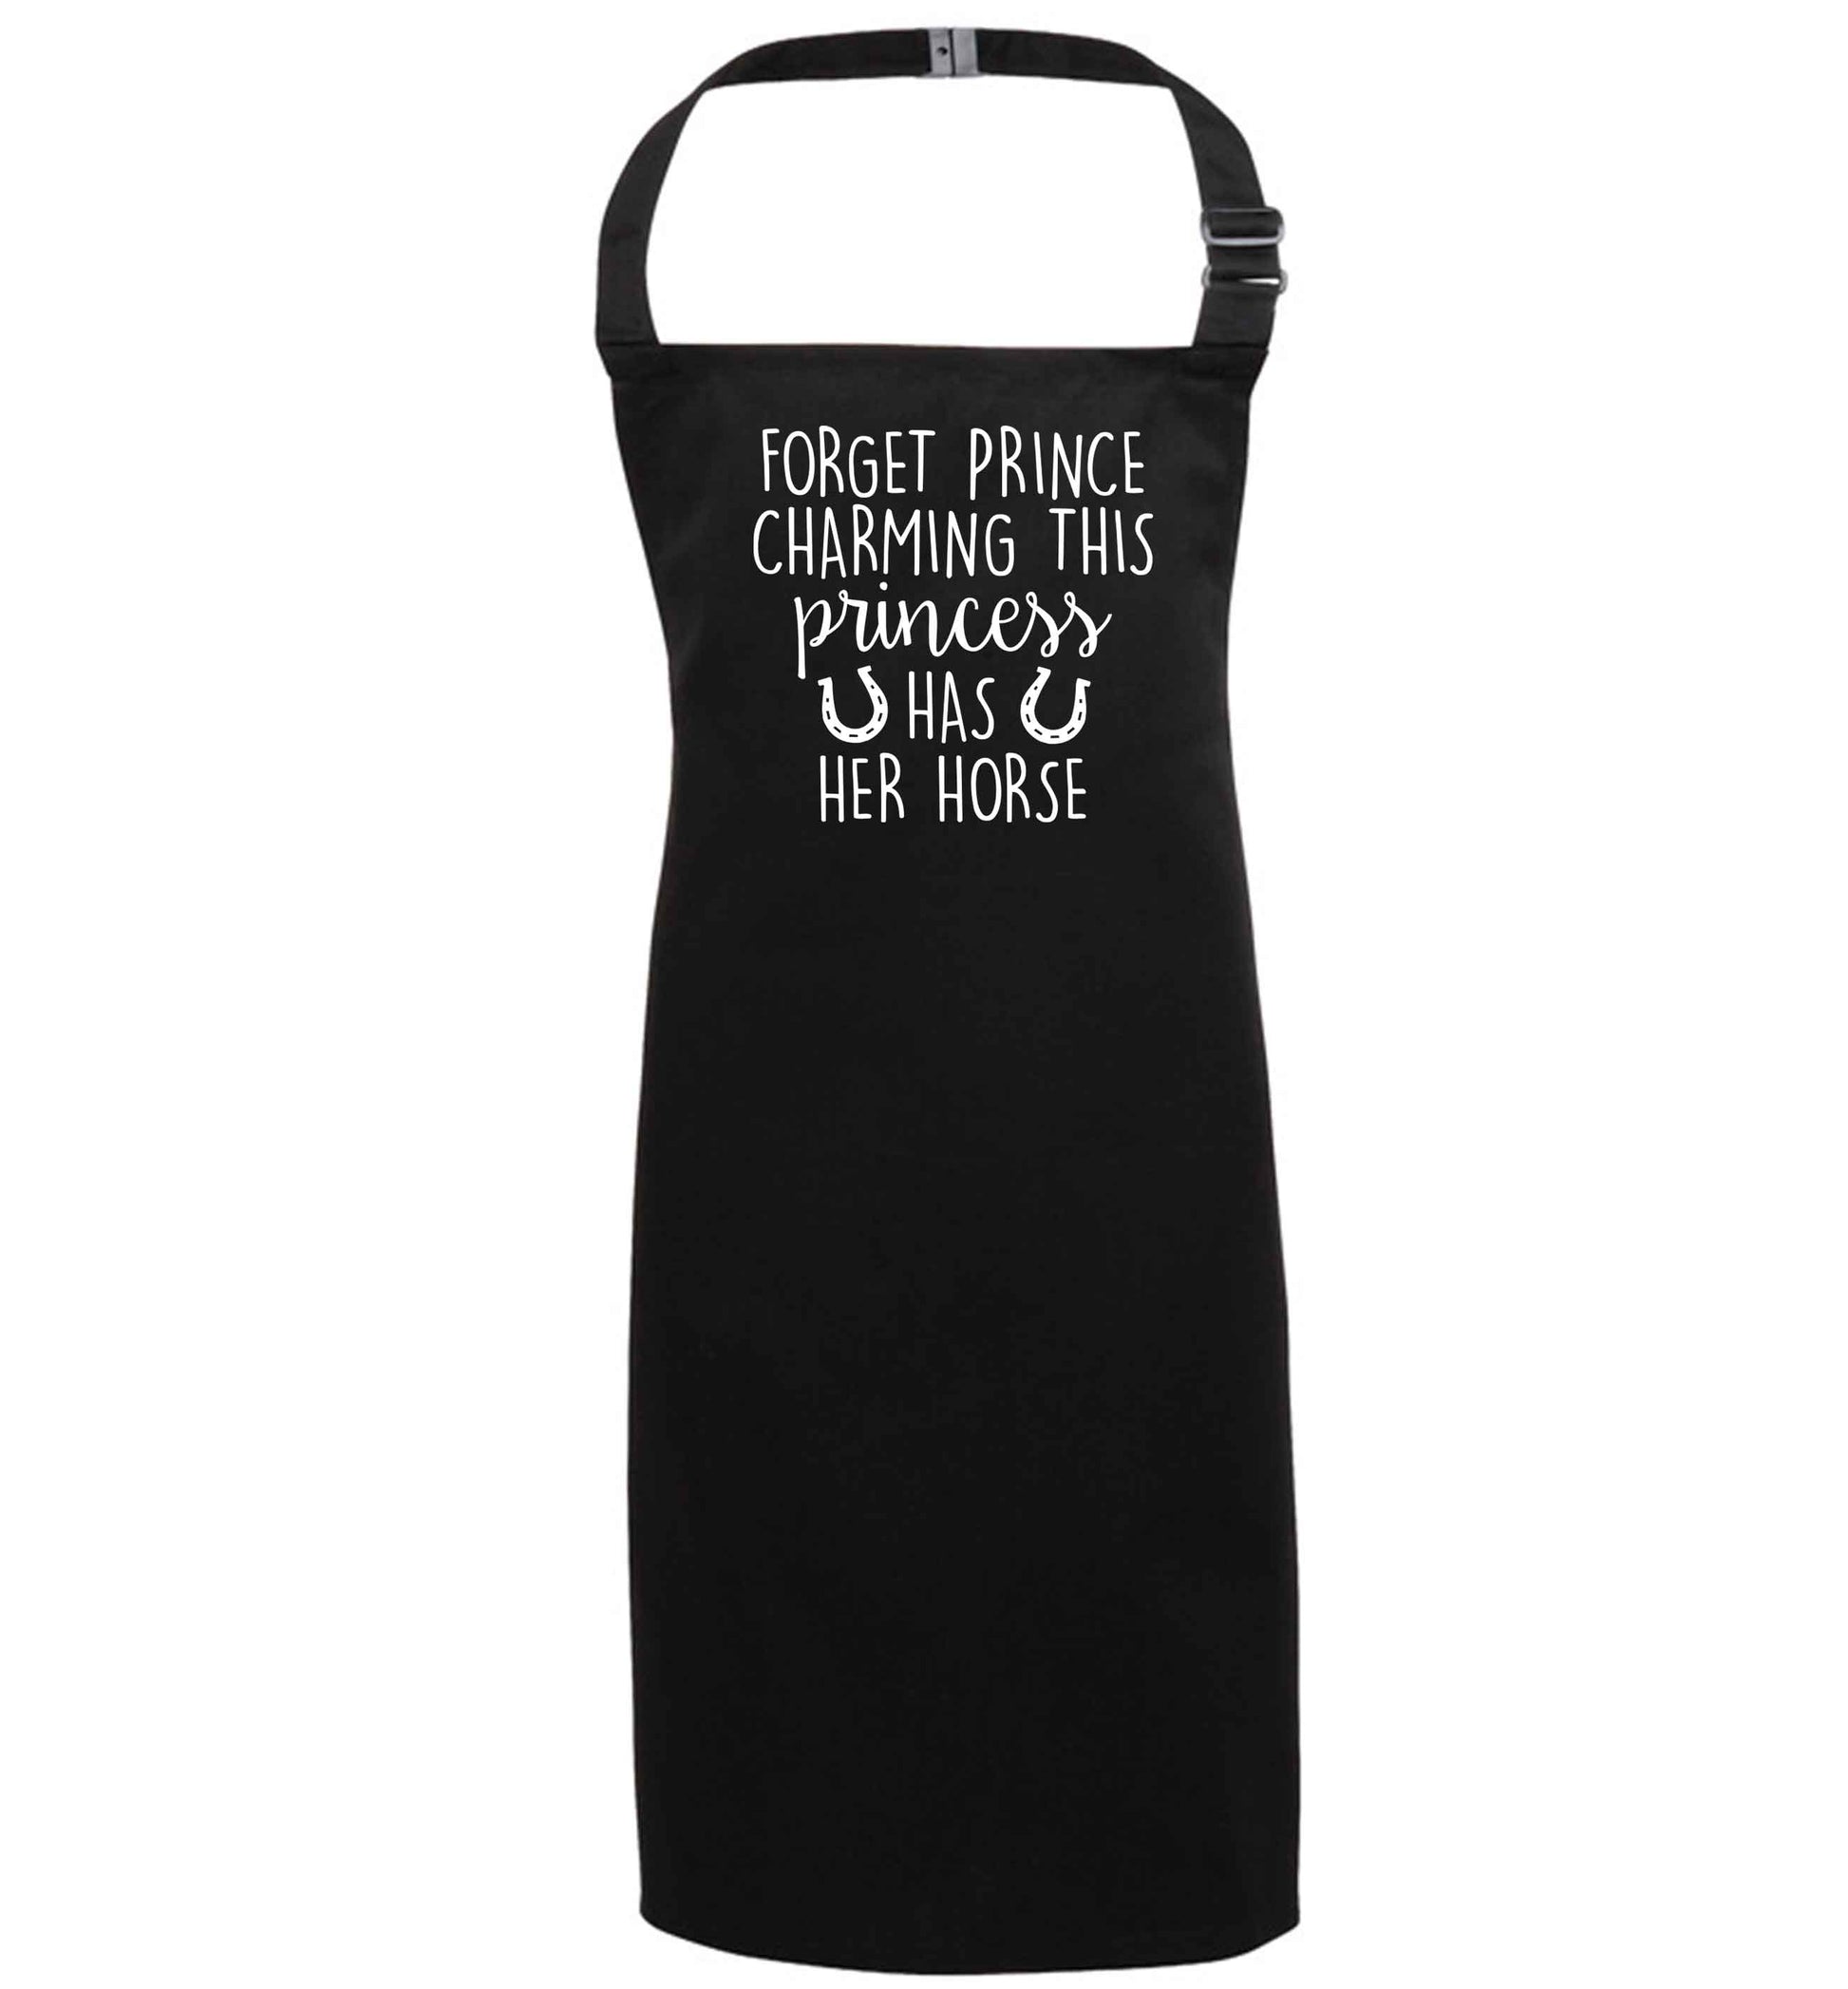 Forget prince charming this princess has her horse black apron 7-10 years